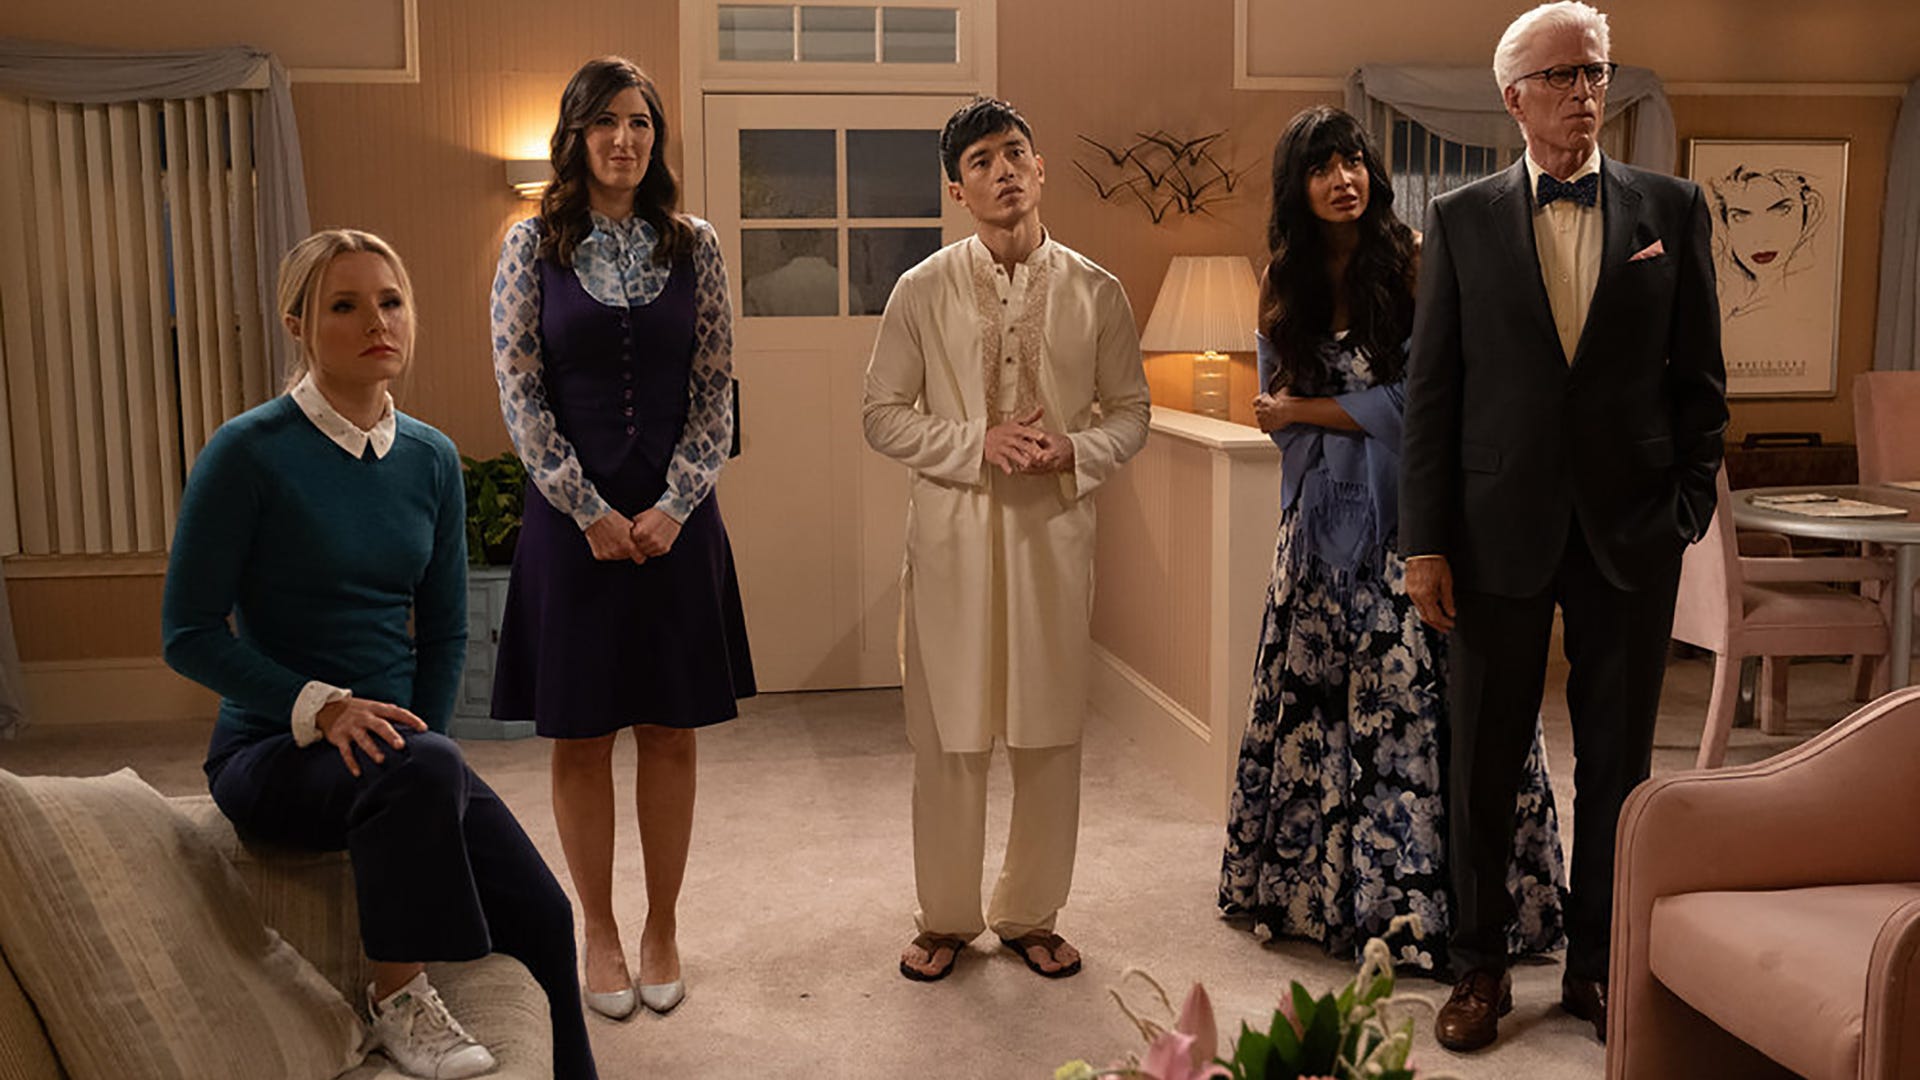 Kristen Bell, D'Arcy Carden, Manny Jacinto, Jameela Jamil, Ted Danson, The Good Place